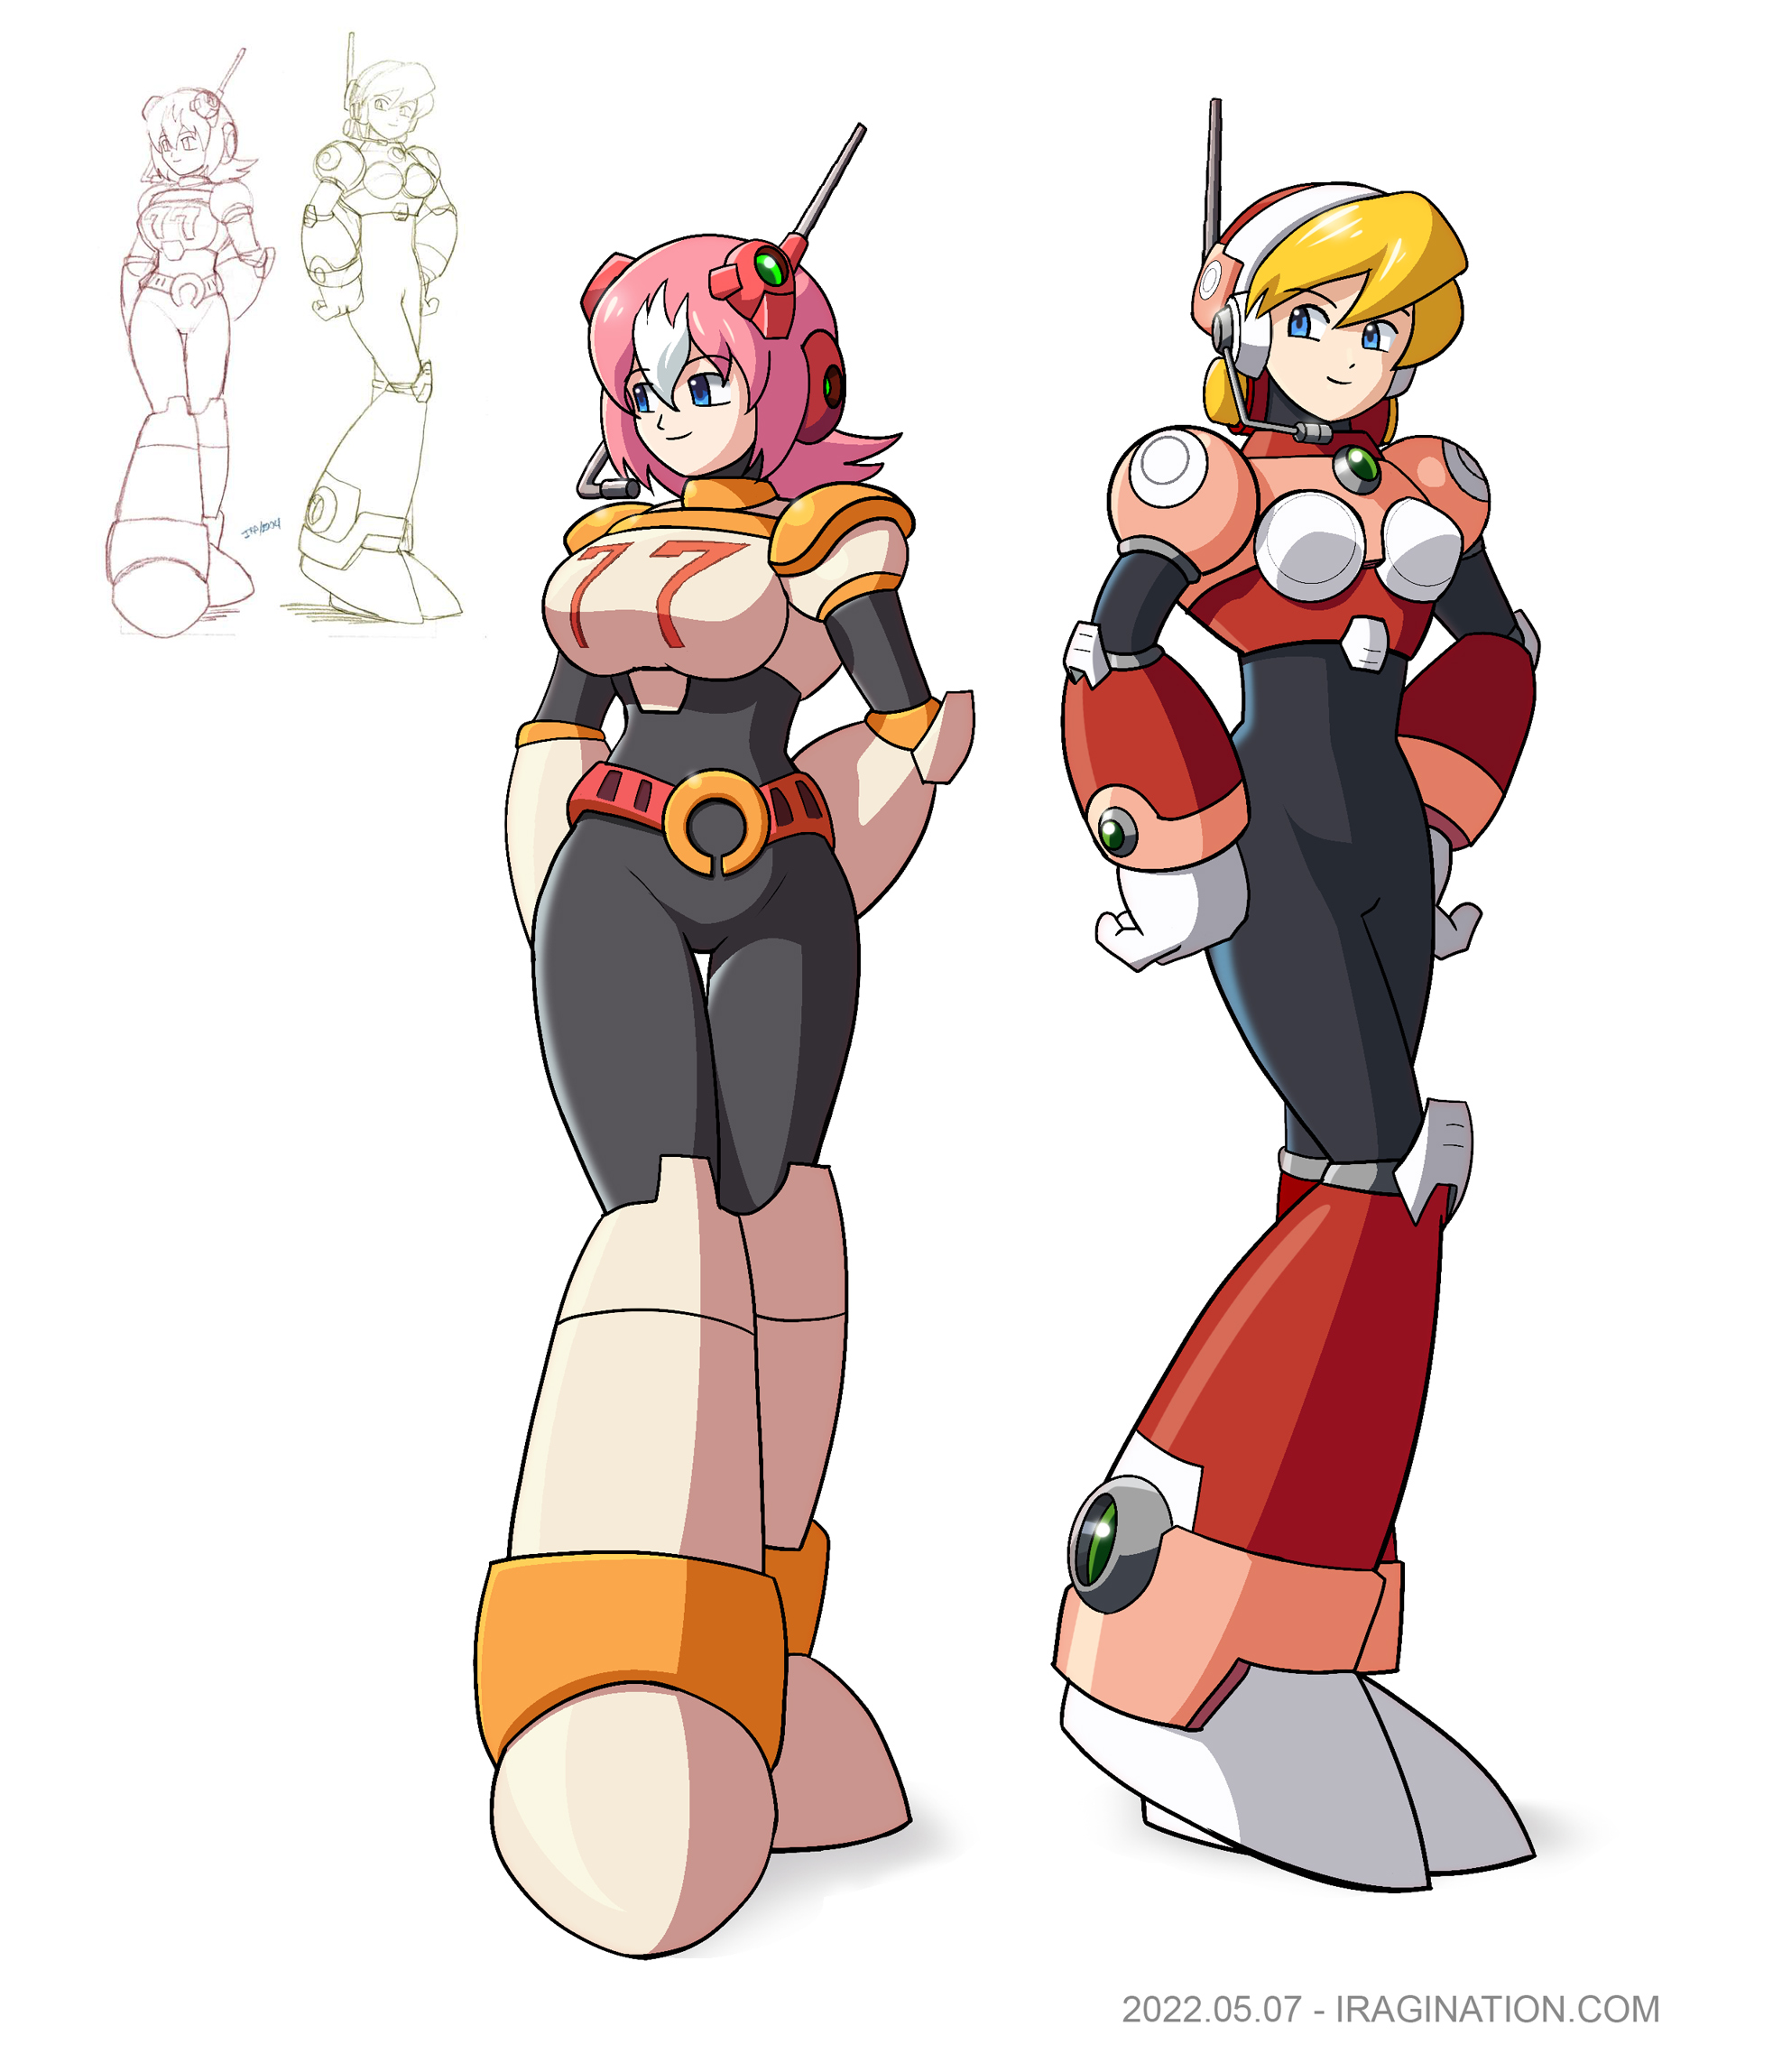 Nana and Alia
Following up my [url=https://www.iragination.com/illust/displayimage.php?pid=560]previous post[/url], this is another retrace of an old sketch I did many years ago. For this one, I bumped up the resolution and did some considerable rendering.

[b]Mega Man X Command Mission[/b] was released before [b]Mega Man X8[/b], so I guess that when I drew this, I only had Alia’s design from X5 to X7 as a reference. Not sure what the idea of this illustration was. I guess I wanted to put together the top known Mega Man X navigators at that time.

As you can see from the original sketch on the top left, Alia came up almost exactly the same, but Nana was much shorter, so I made some adjustments. I guess she should be at least as tall as Pallette, but I still see her shorter than Alia. Not sure by how much, though. At some point, Alia was taller than X if you follow the official X5 art to the letter. 

One could argue forever if these two characters could have possibly met with these particular appearances. Maybe Alia already had her X8 style by the time of the events of Mega Man X Command Mission. Depending on how permanent that style is, this scene would be possible or not. At least Rockman X DiVE has shown how flexible Reploids are at changing their outfit.

Mega Man X (C) CAPCOM

Keywords: nana alia